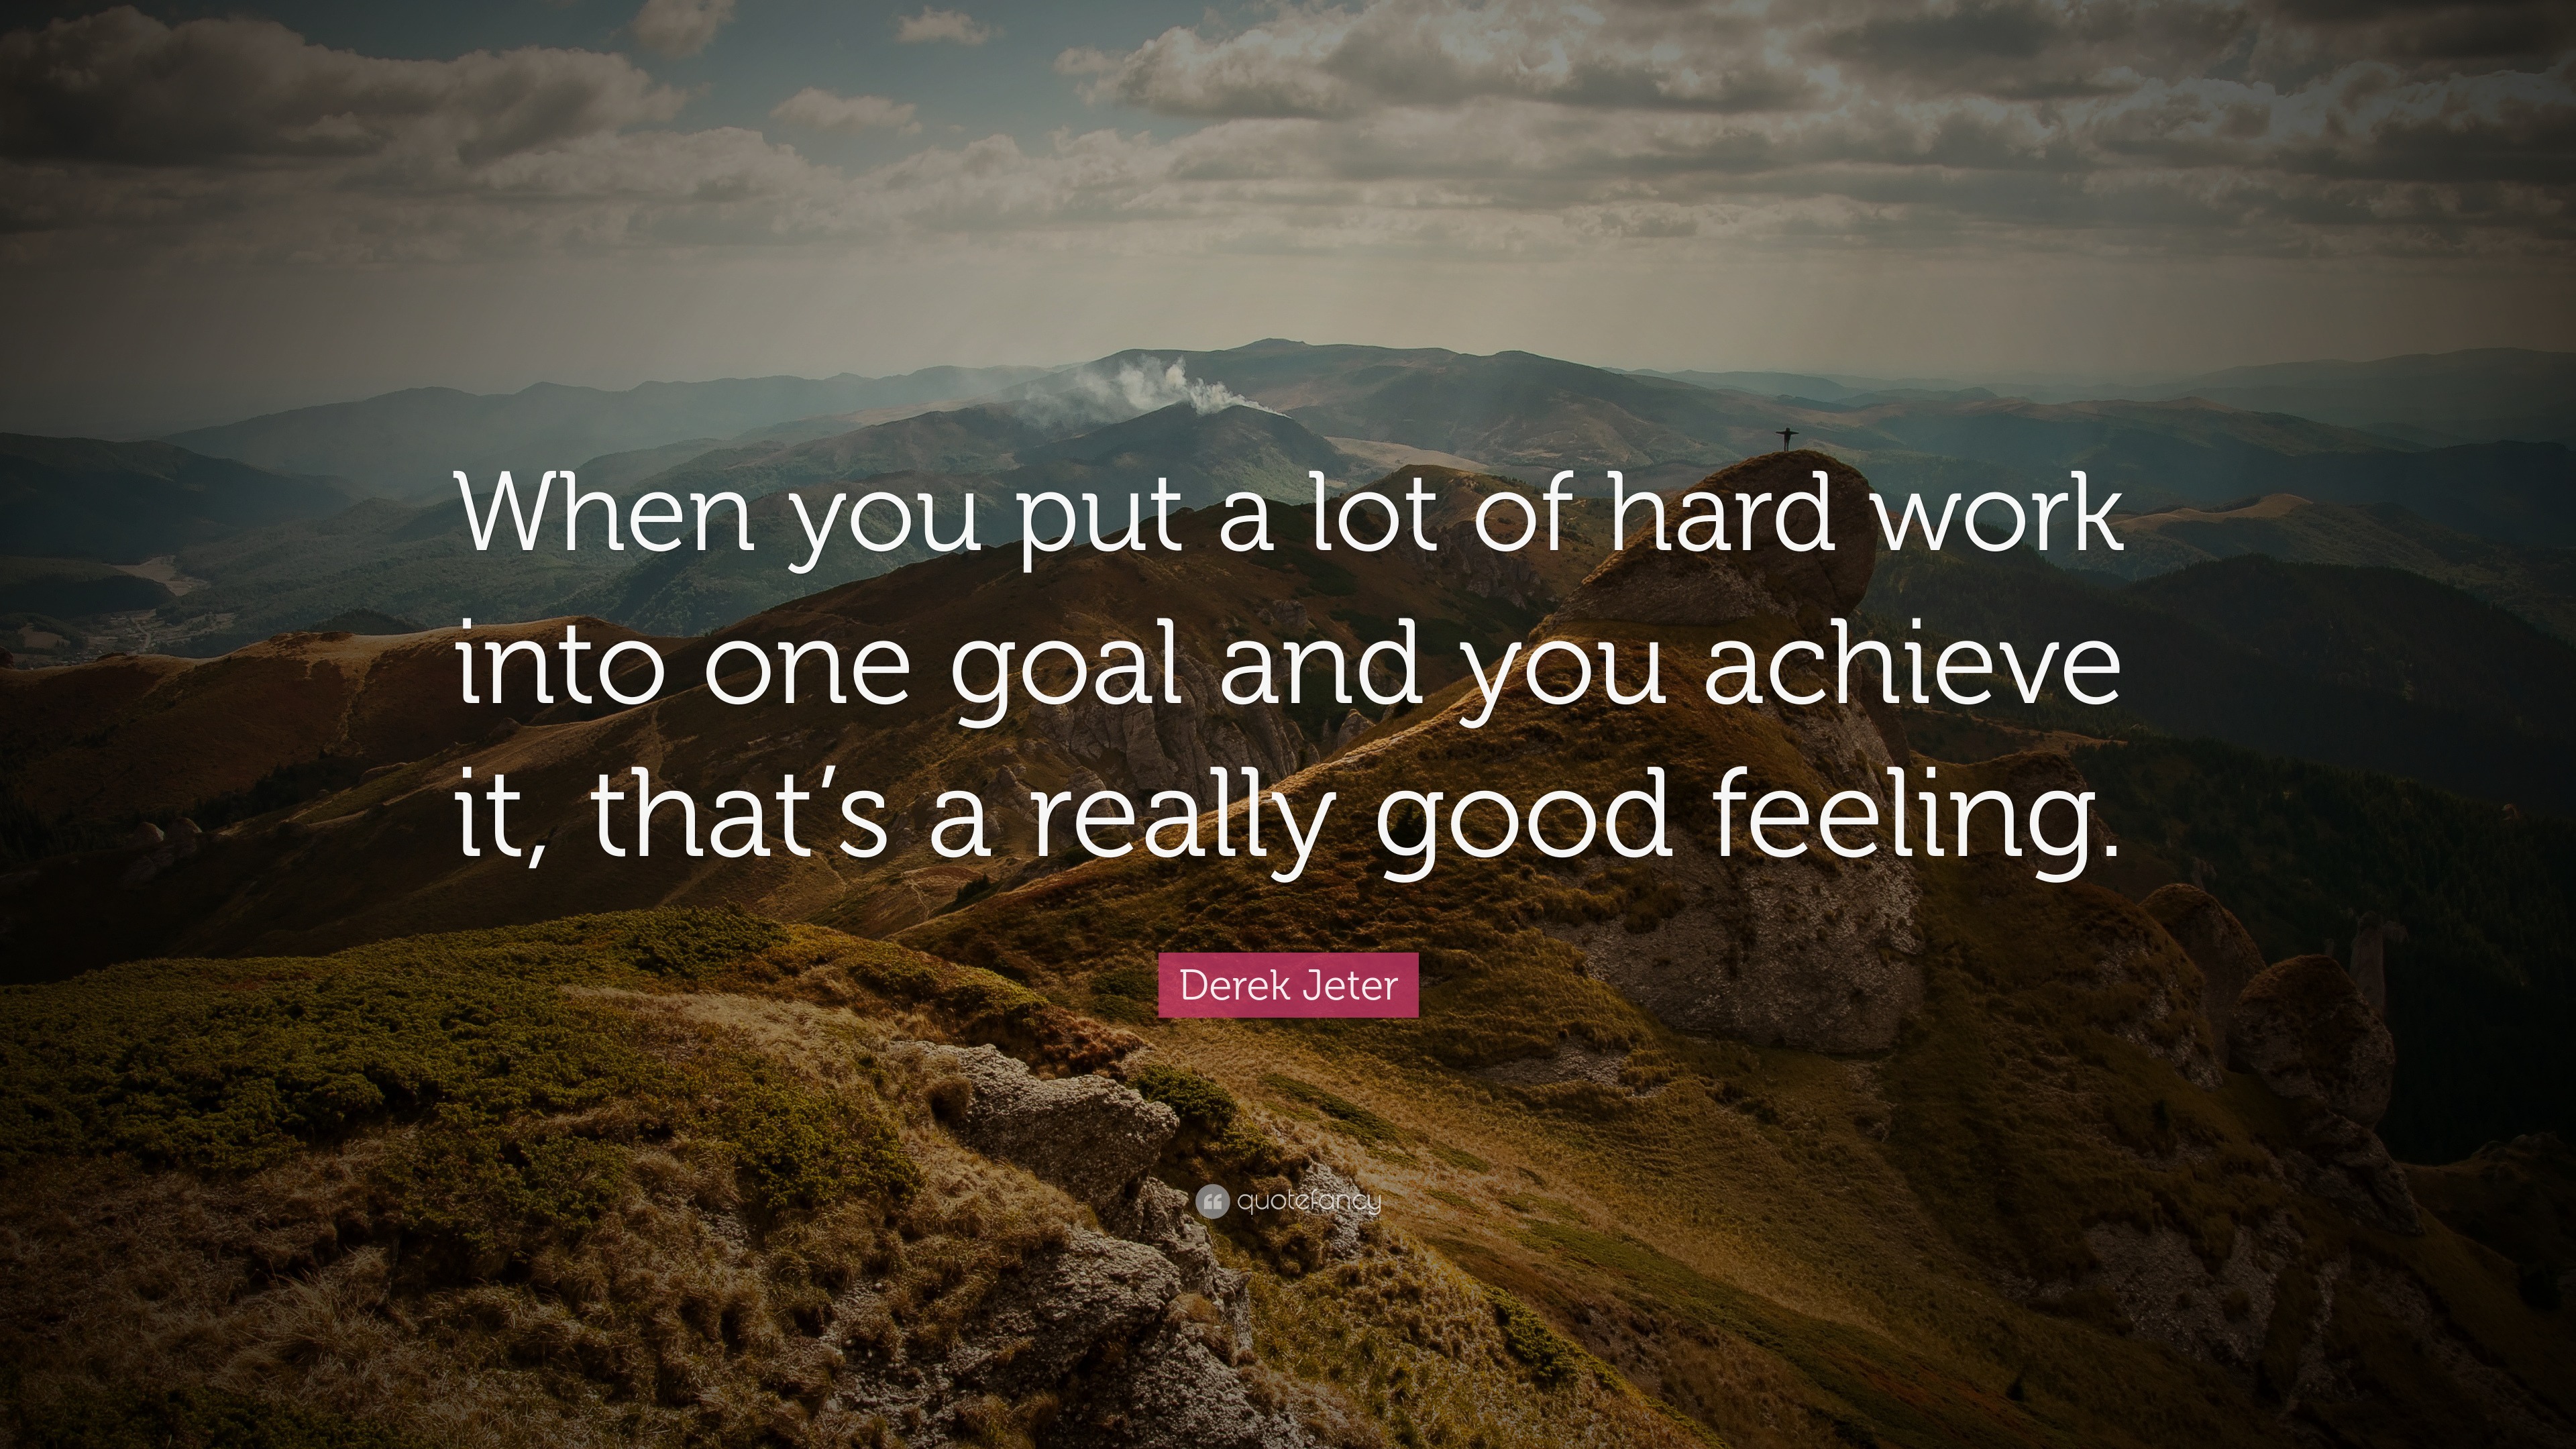 Derek Jeter Quote: “When you put a lot of hard work into one goal